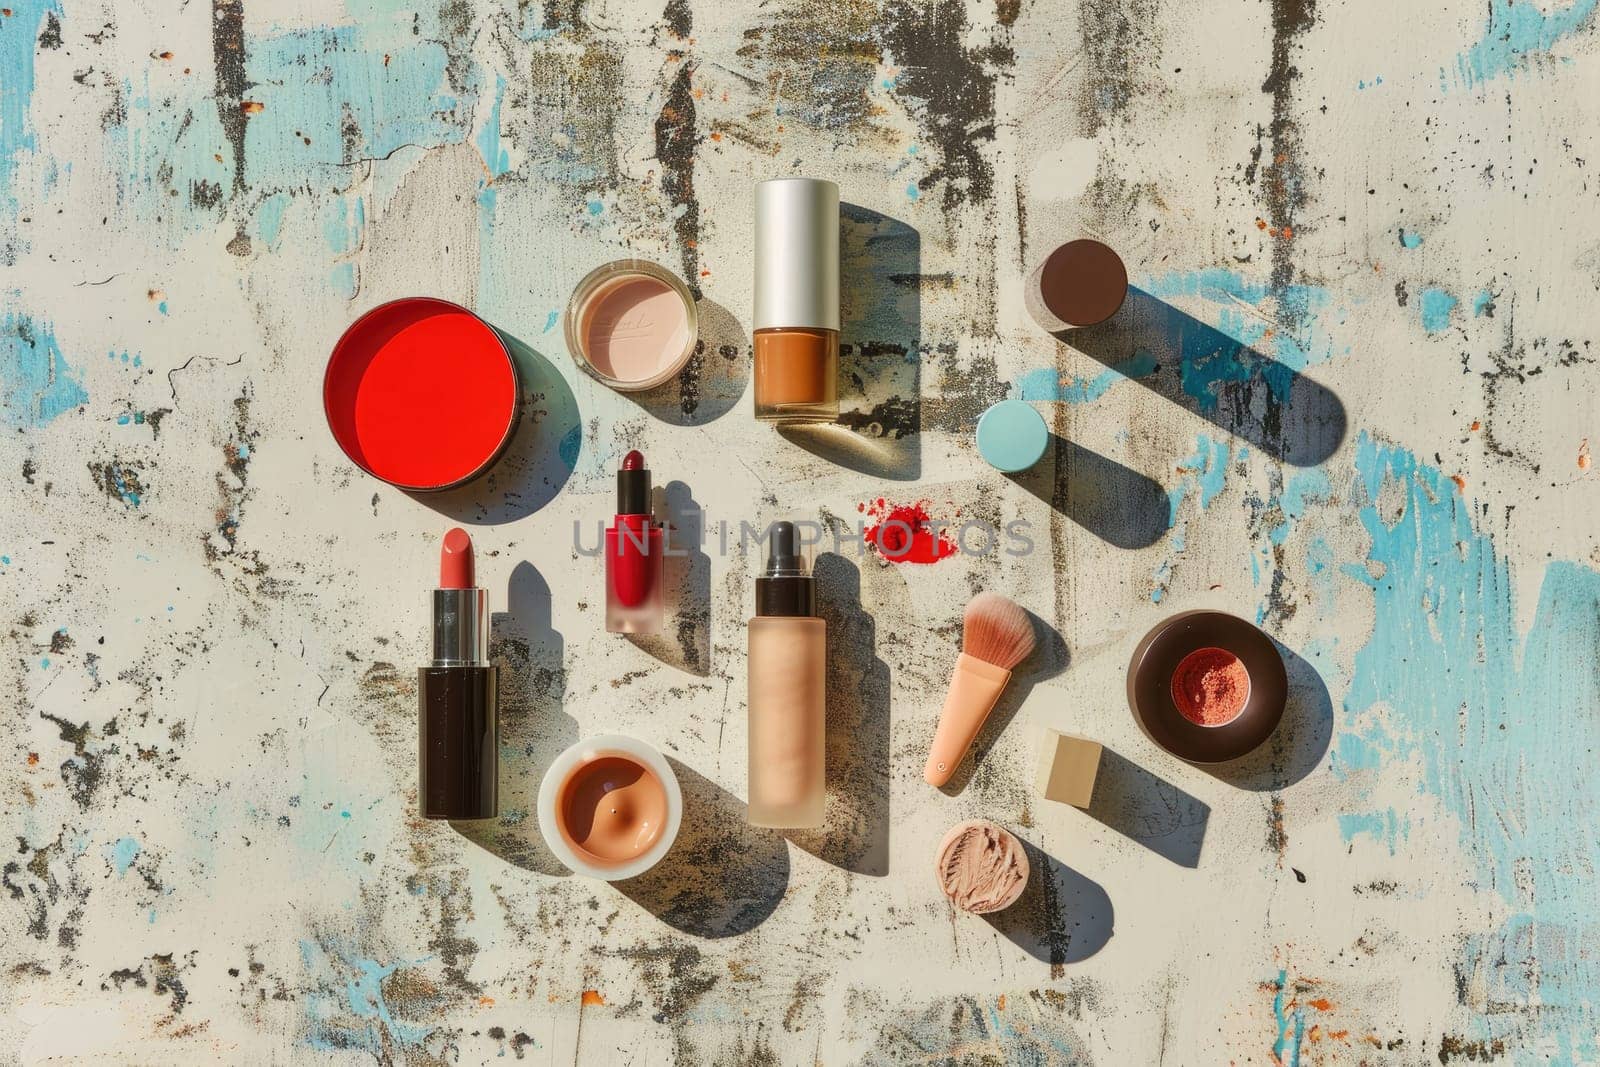 A flat lay composition featuring a variety of cosmetics arranged alongside skincare products on a textured background